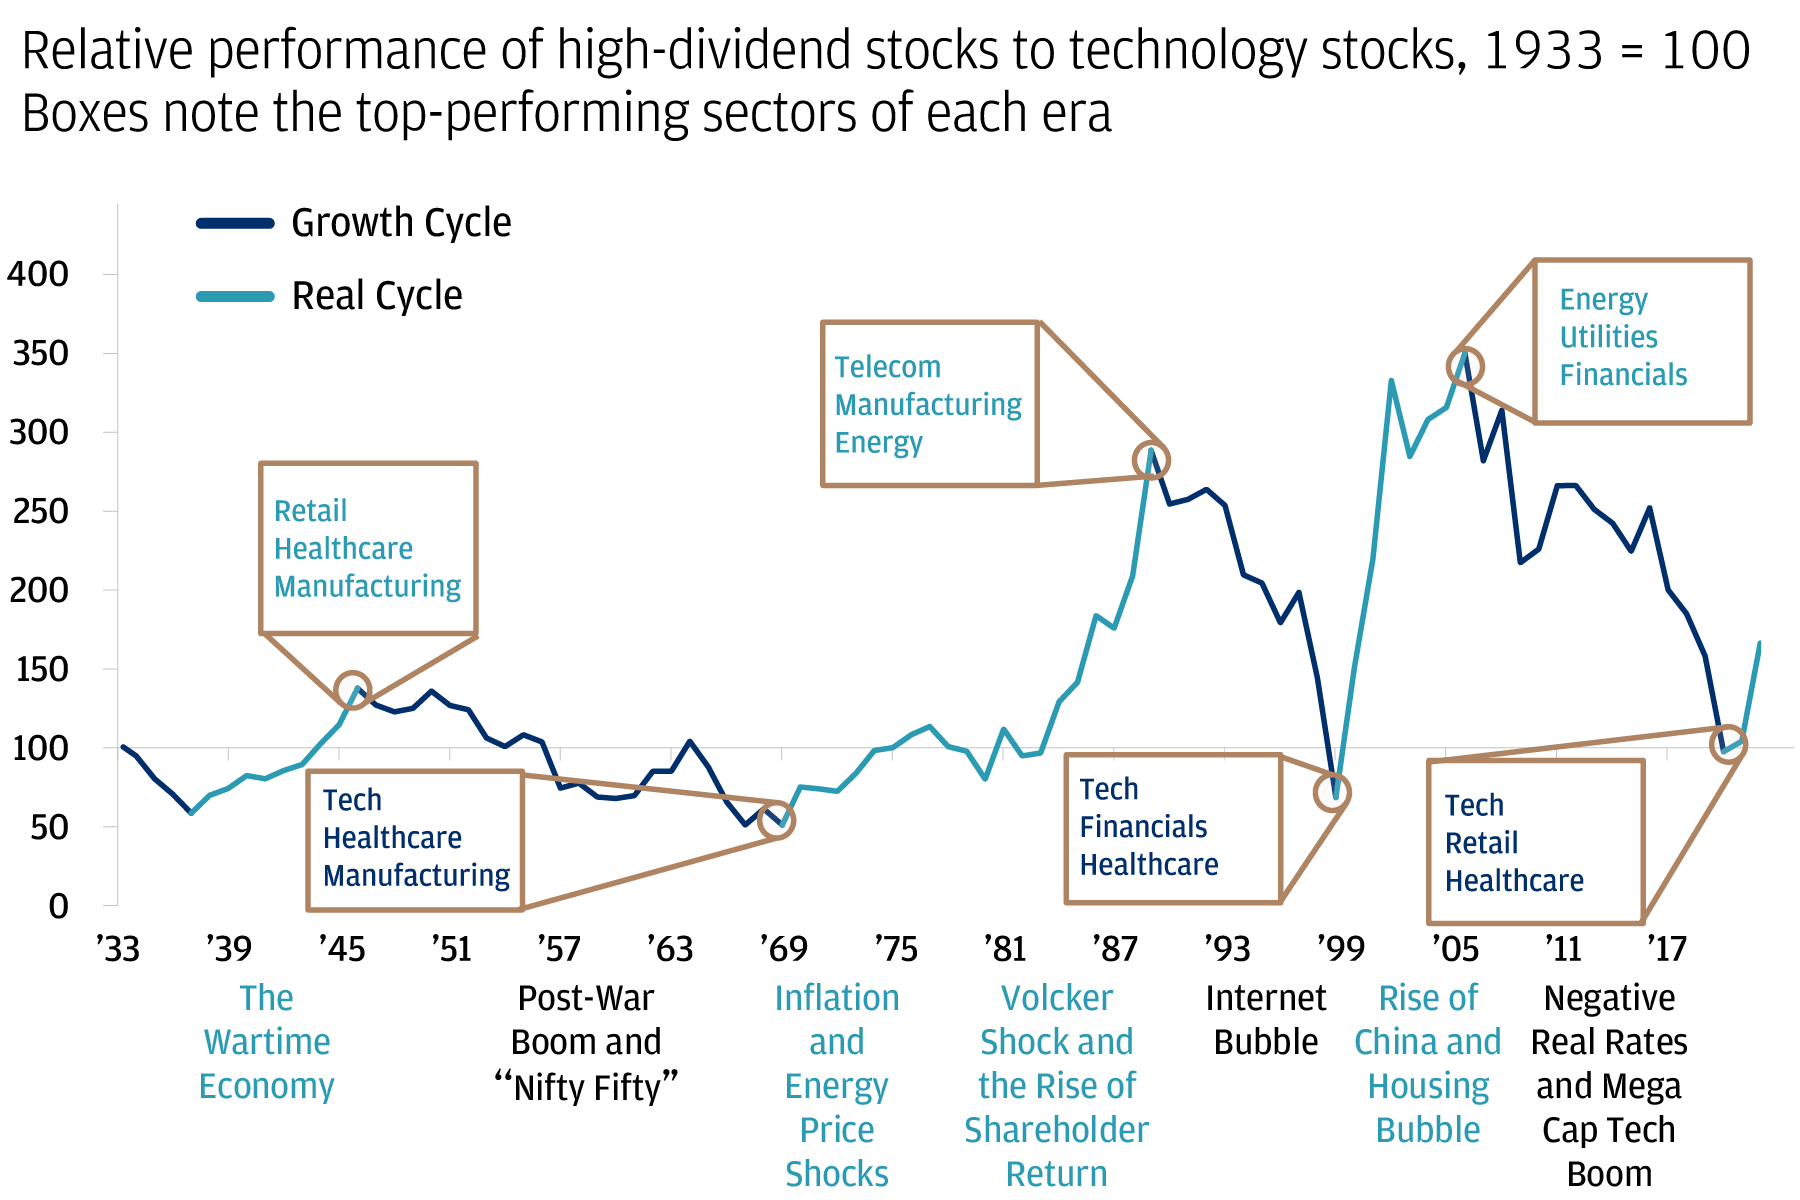 This chart shows the relative performance of high dividend stocks to business equipment stocks from 1933 to 2022.